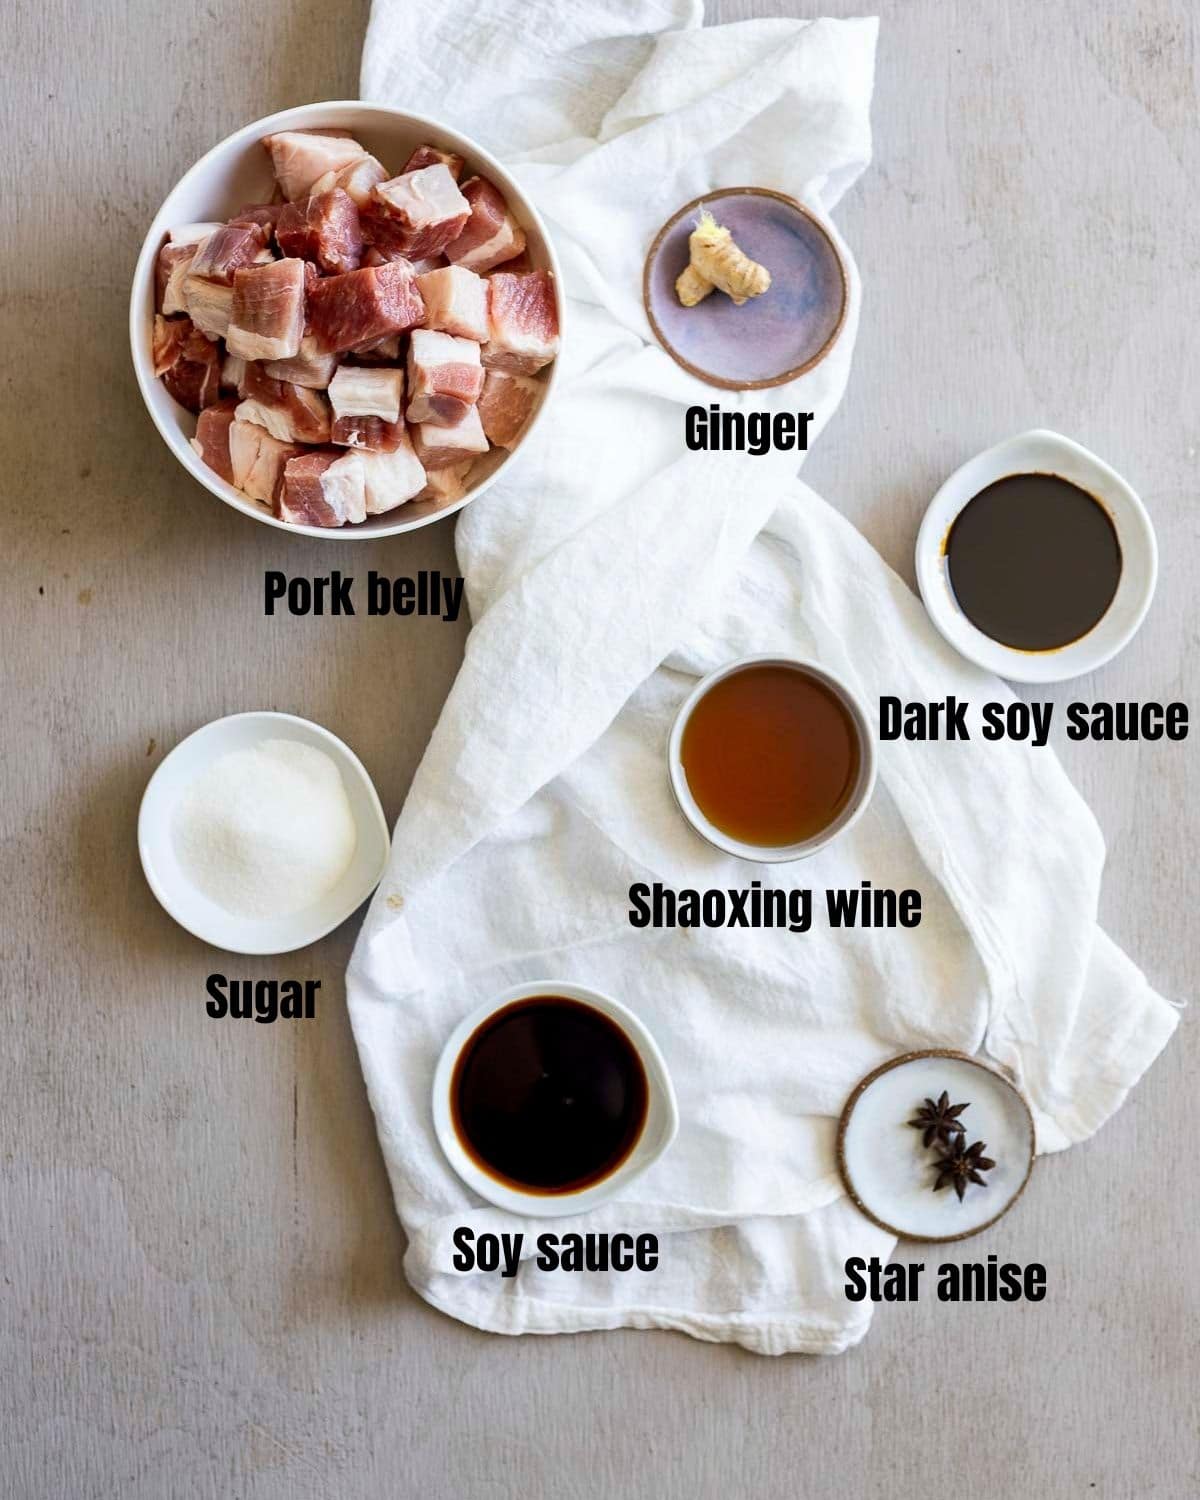 Ingredients to make Chinese braised pork belly arranged individually and labeled.